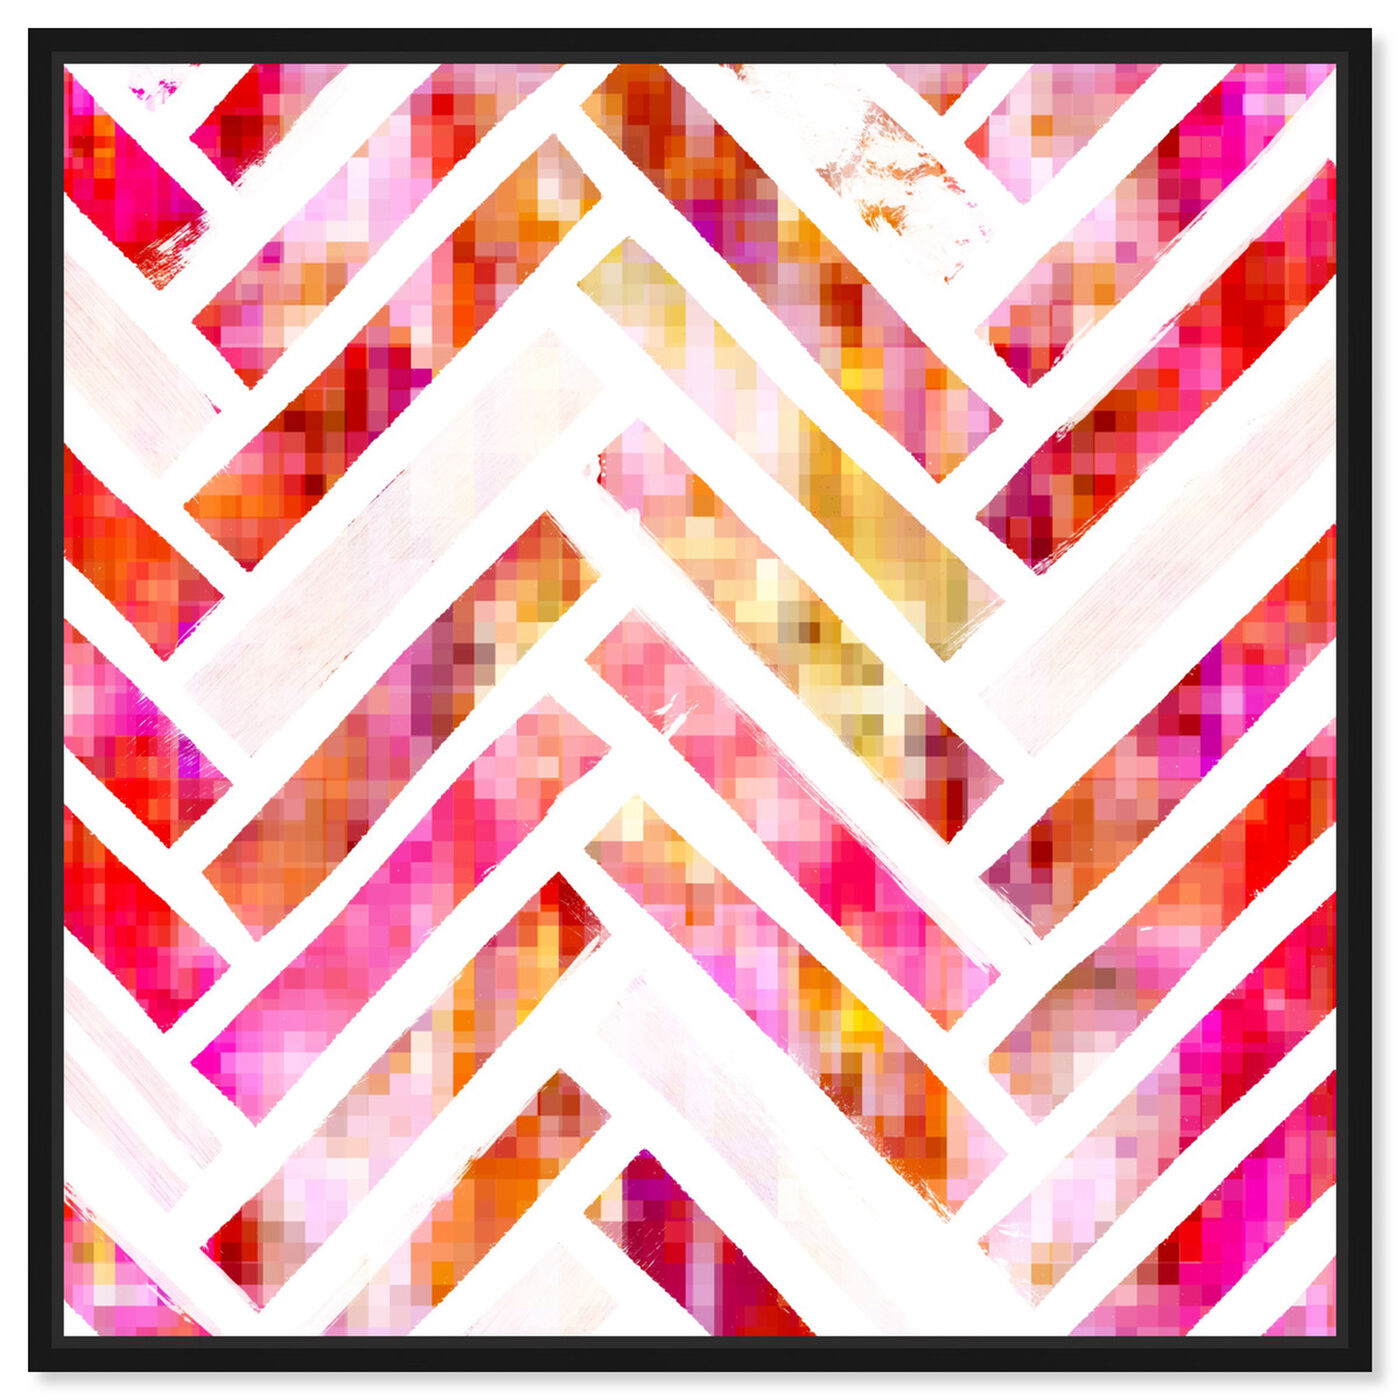 Front view of Sugar Flake Herringbone featuring abstract and patterns art.